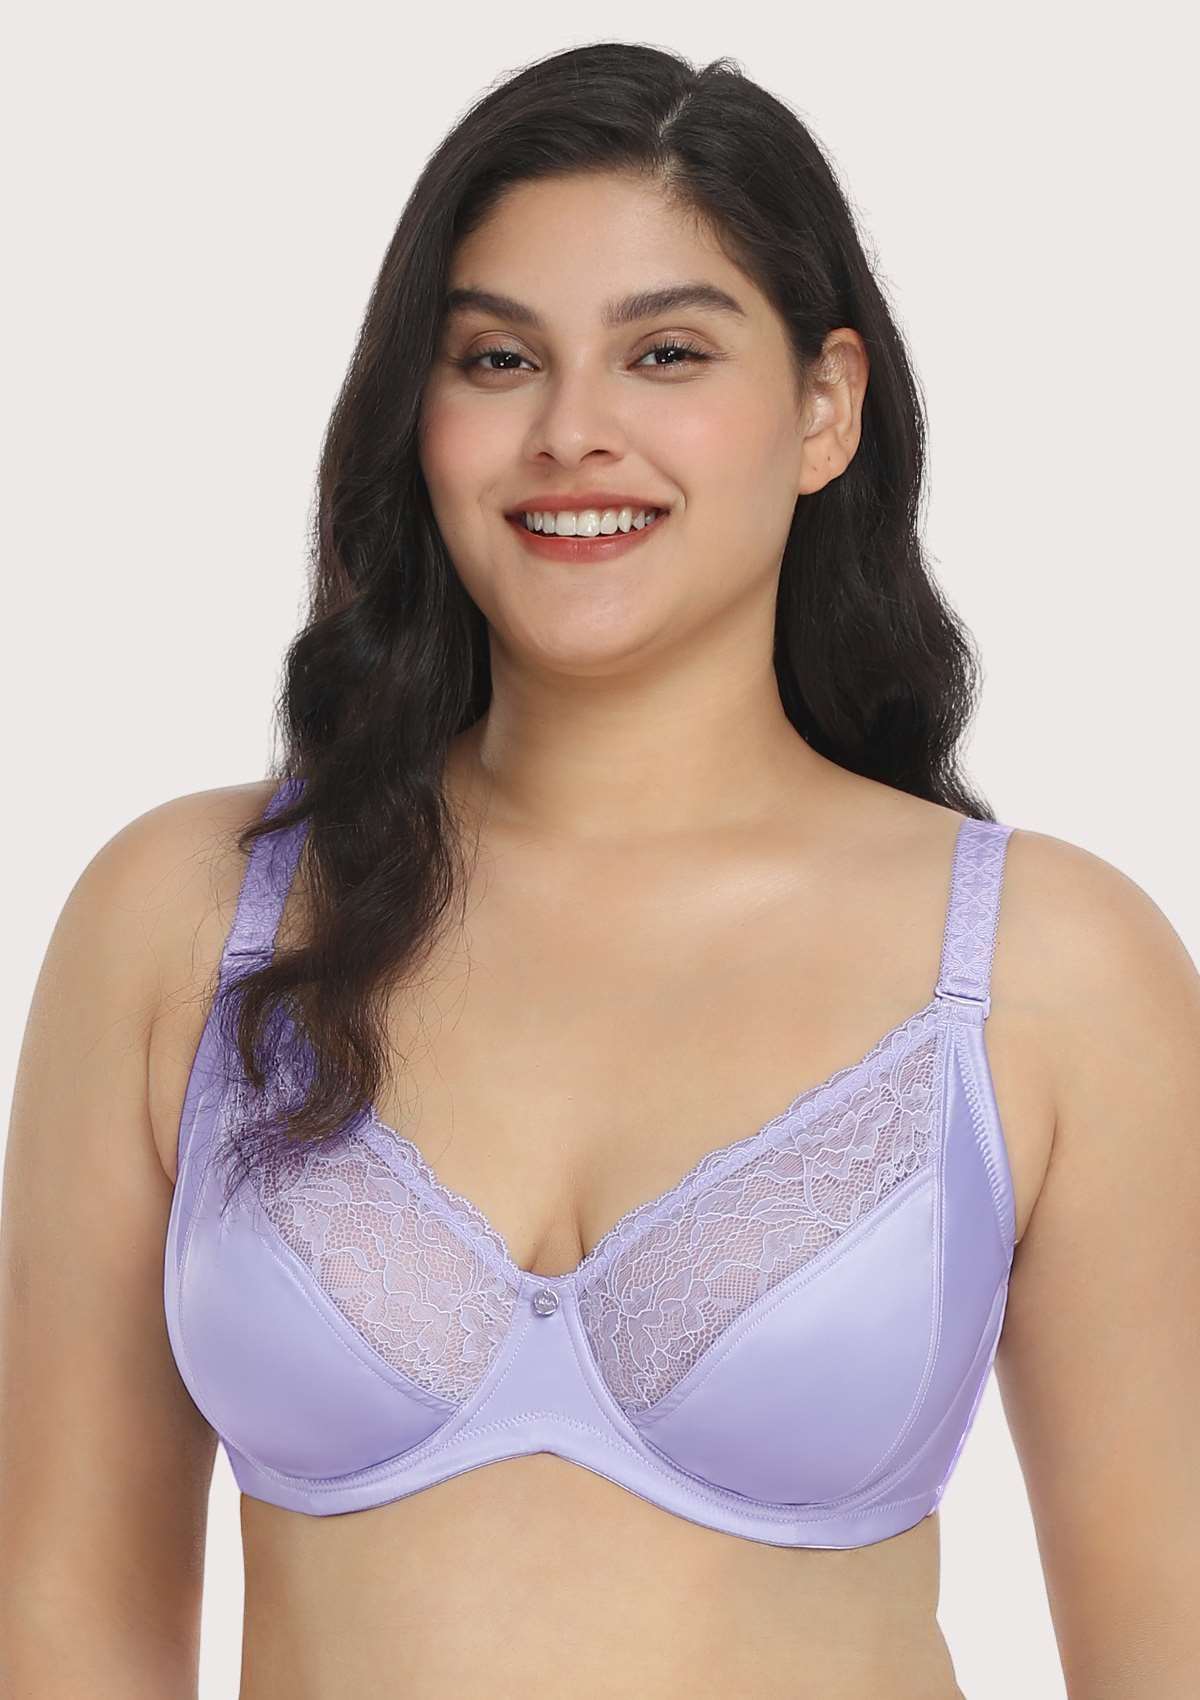 Is That The New Floral Lace Underwire Lingerie Set ??